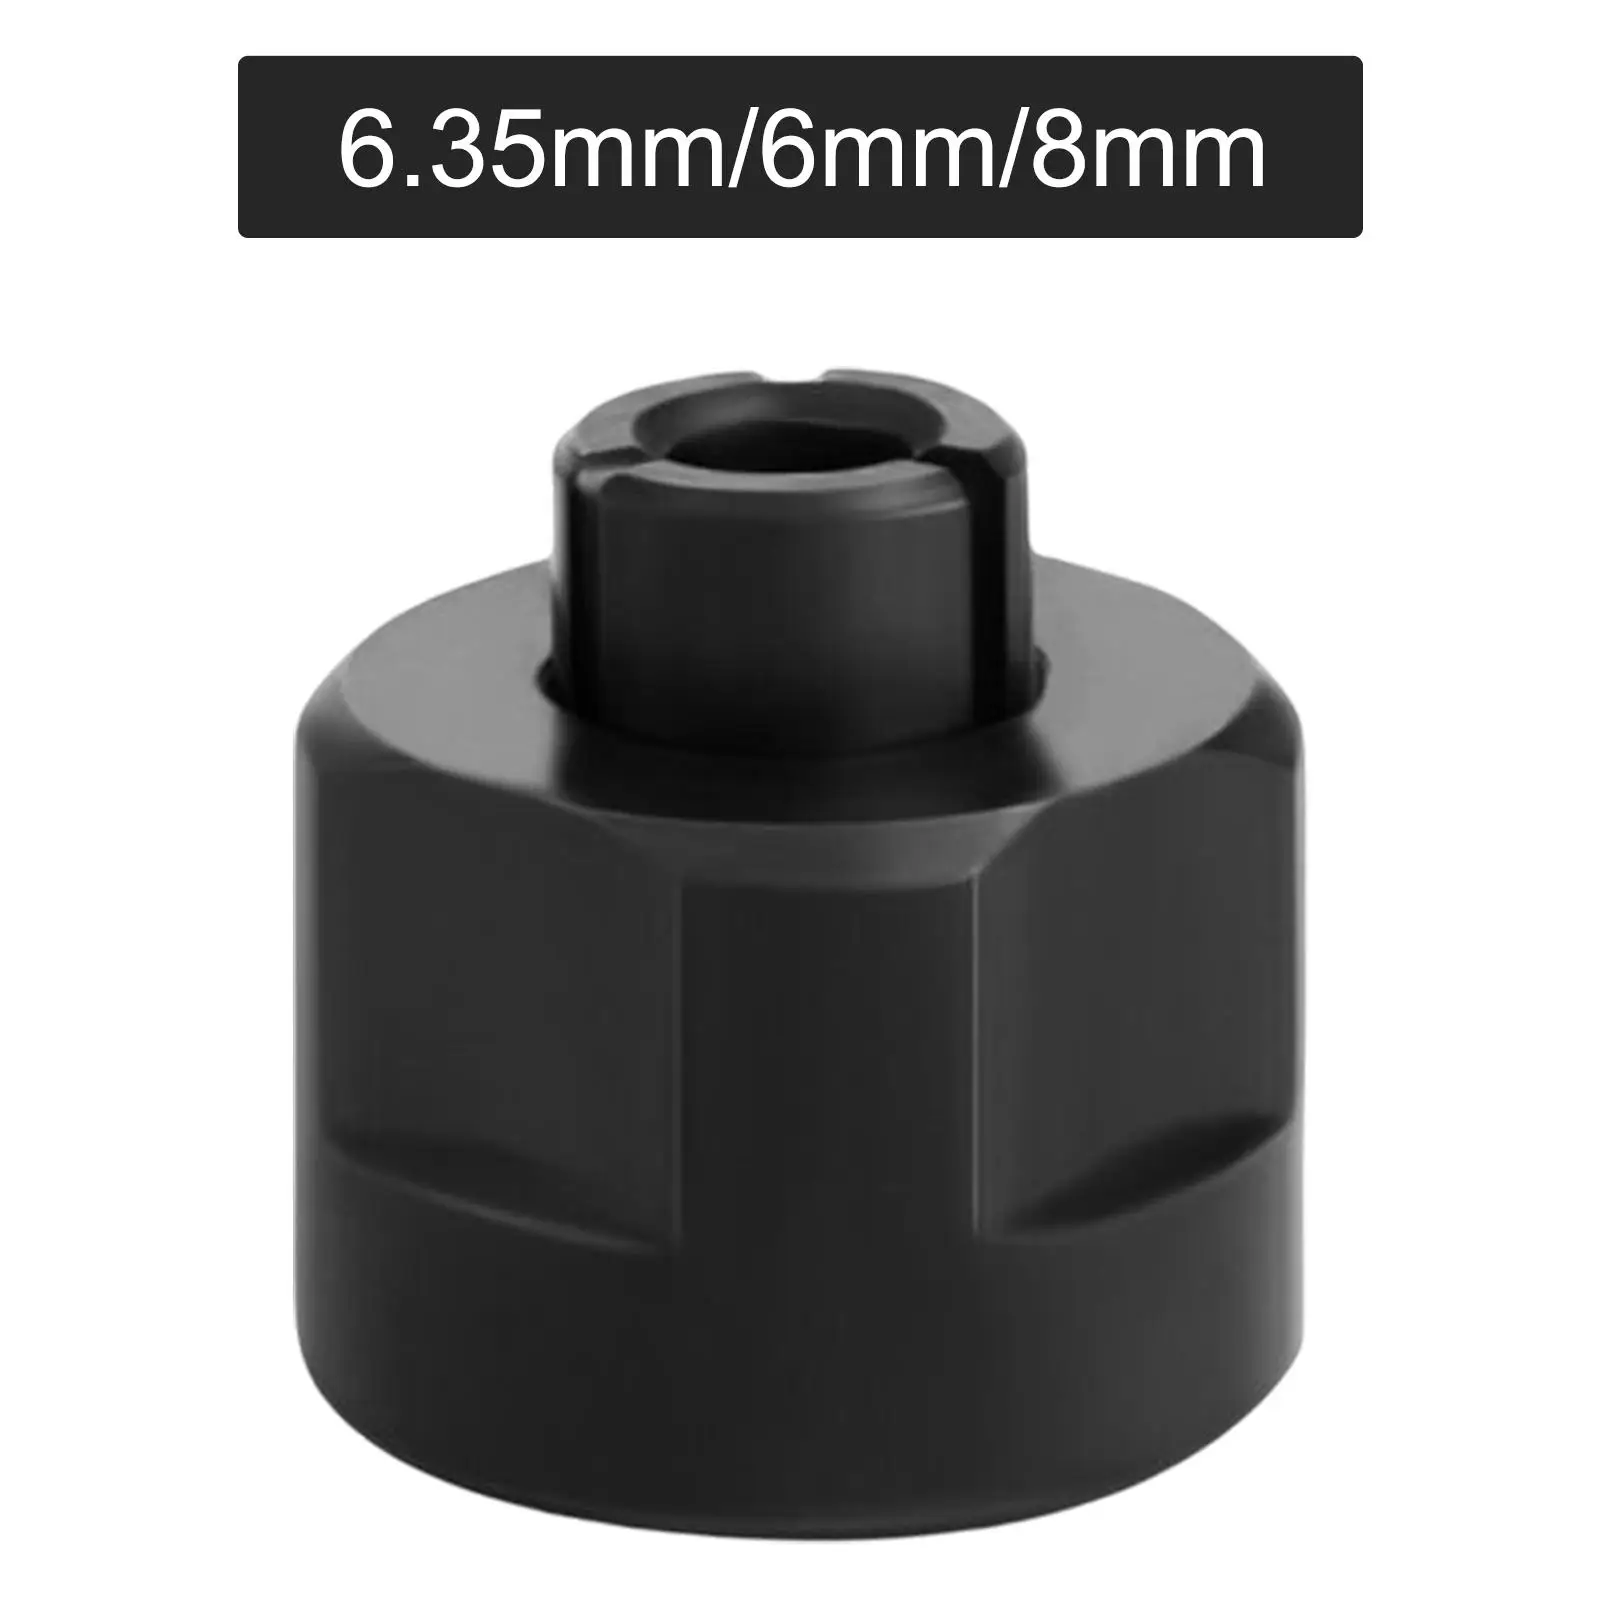 Router Collet Chuck Reduction Sleeve Nut Adapter for Trimming Engraving Machine Electric Router Woodworking Engraving Machine